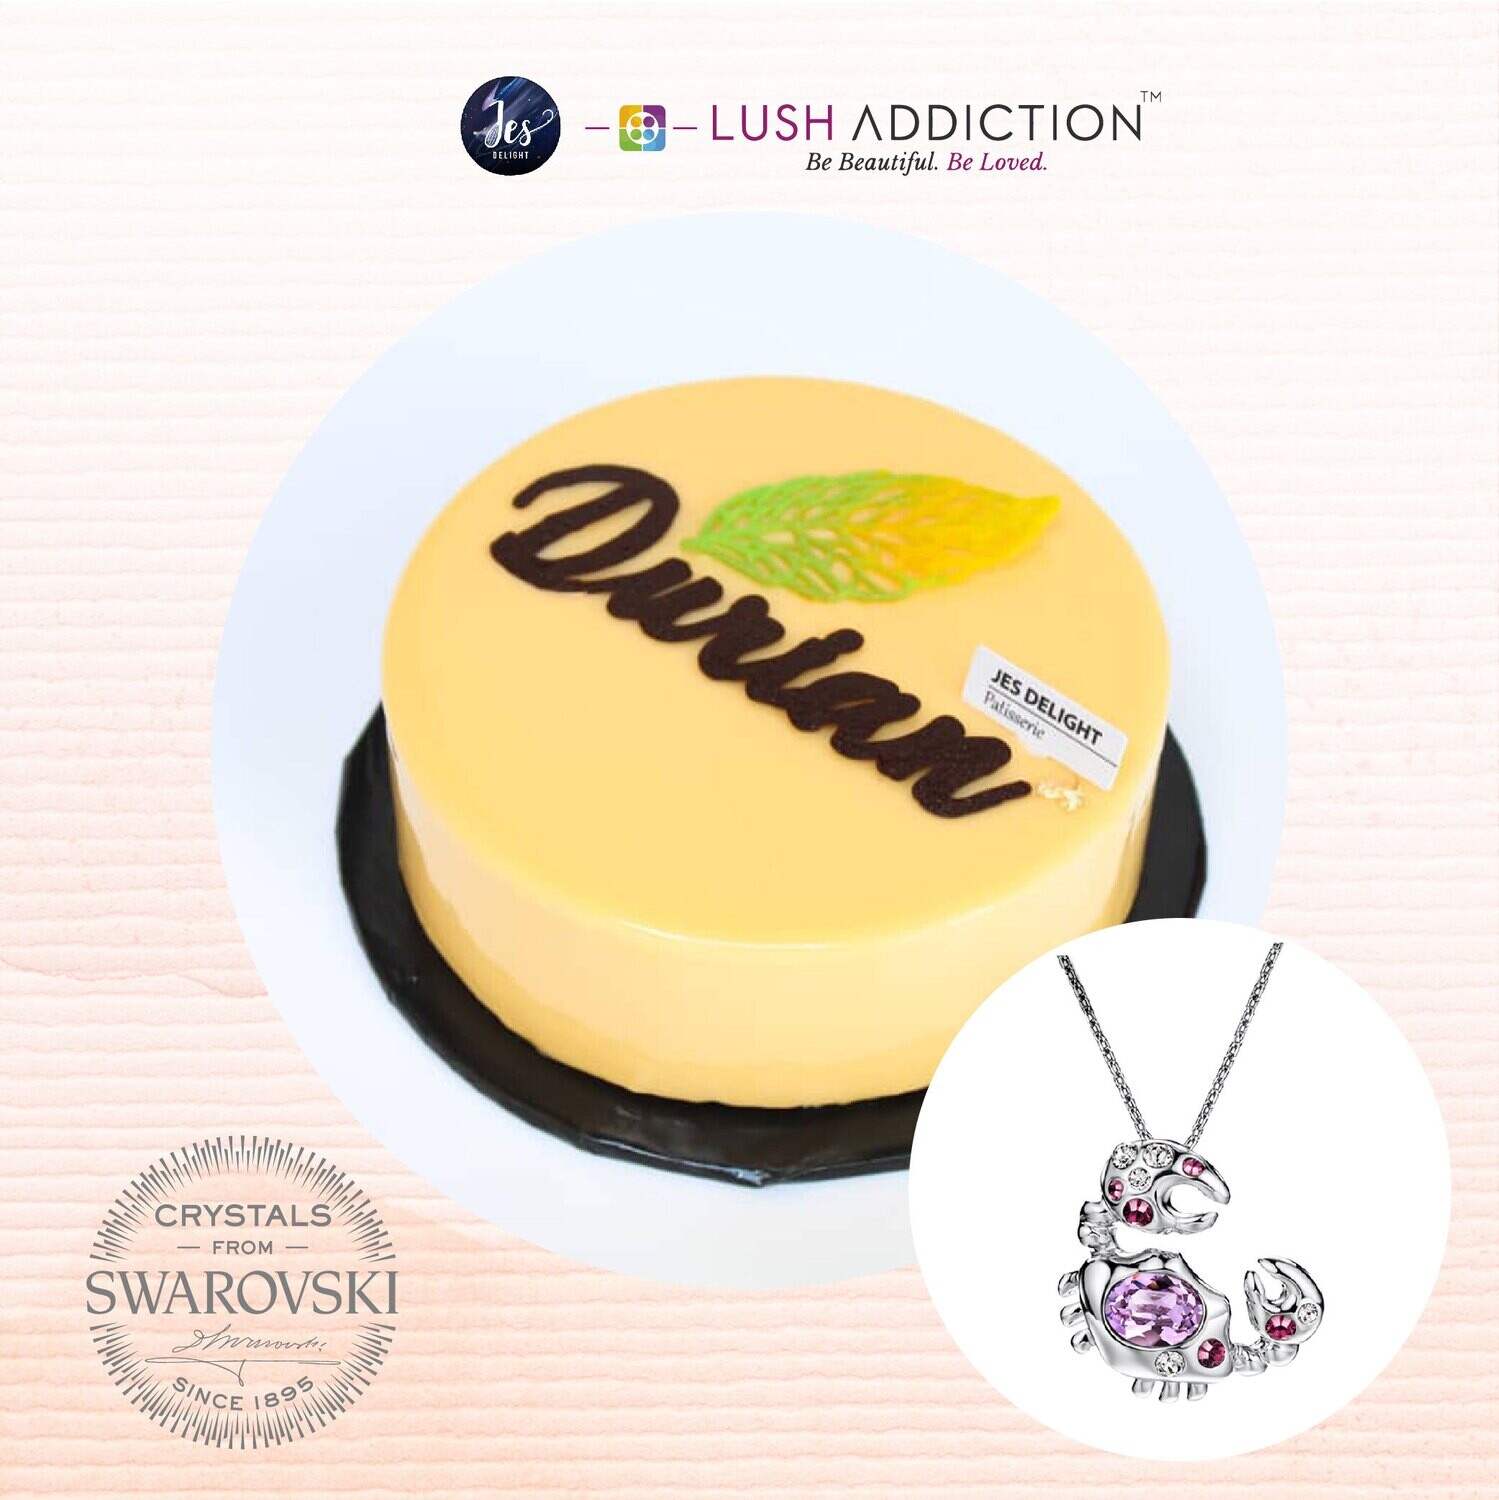 Durian Cake + Lush Cancer Horoscope Necklace Bundle Deal (By: JES Delight from JB)